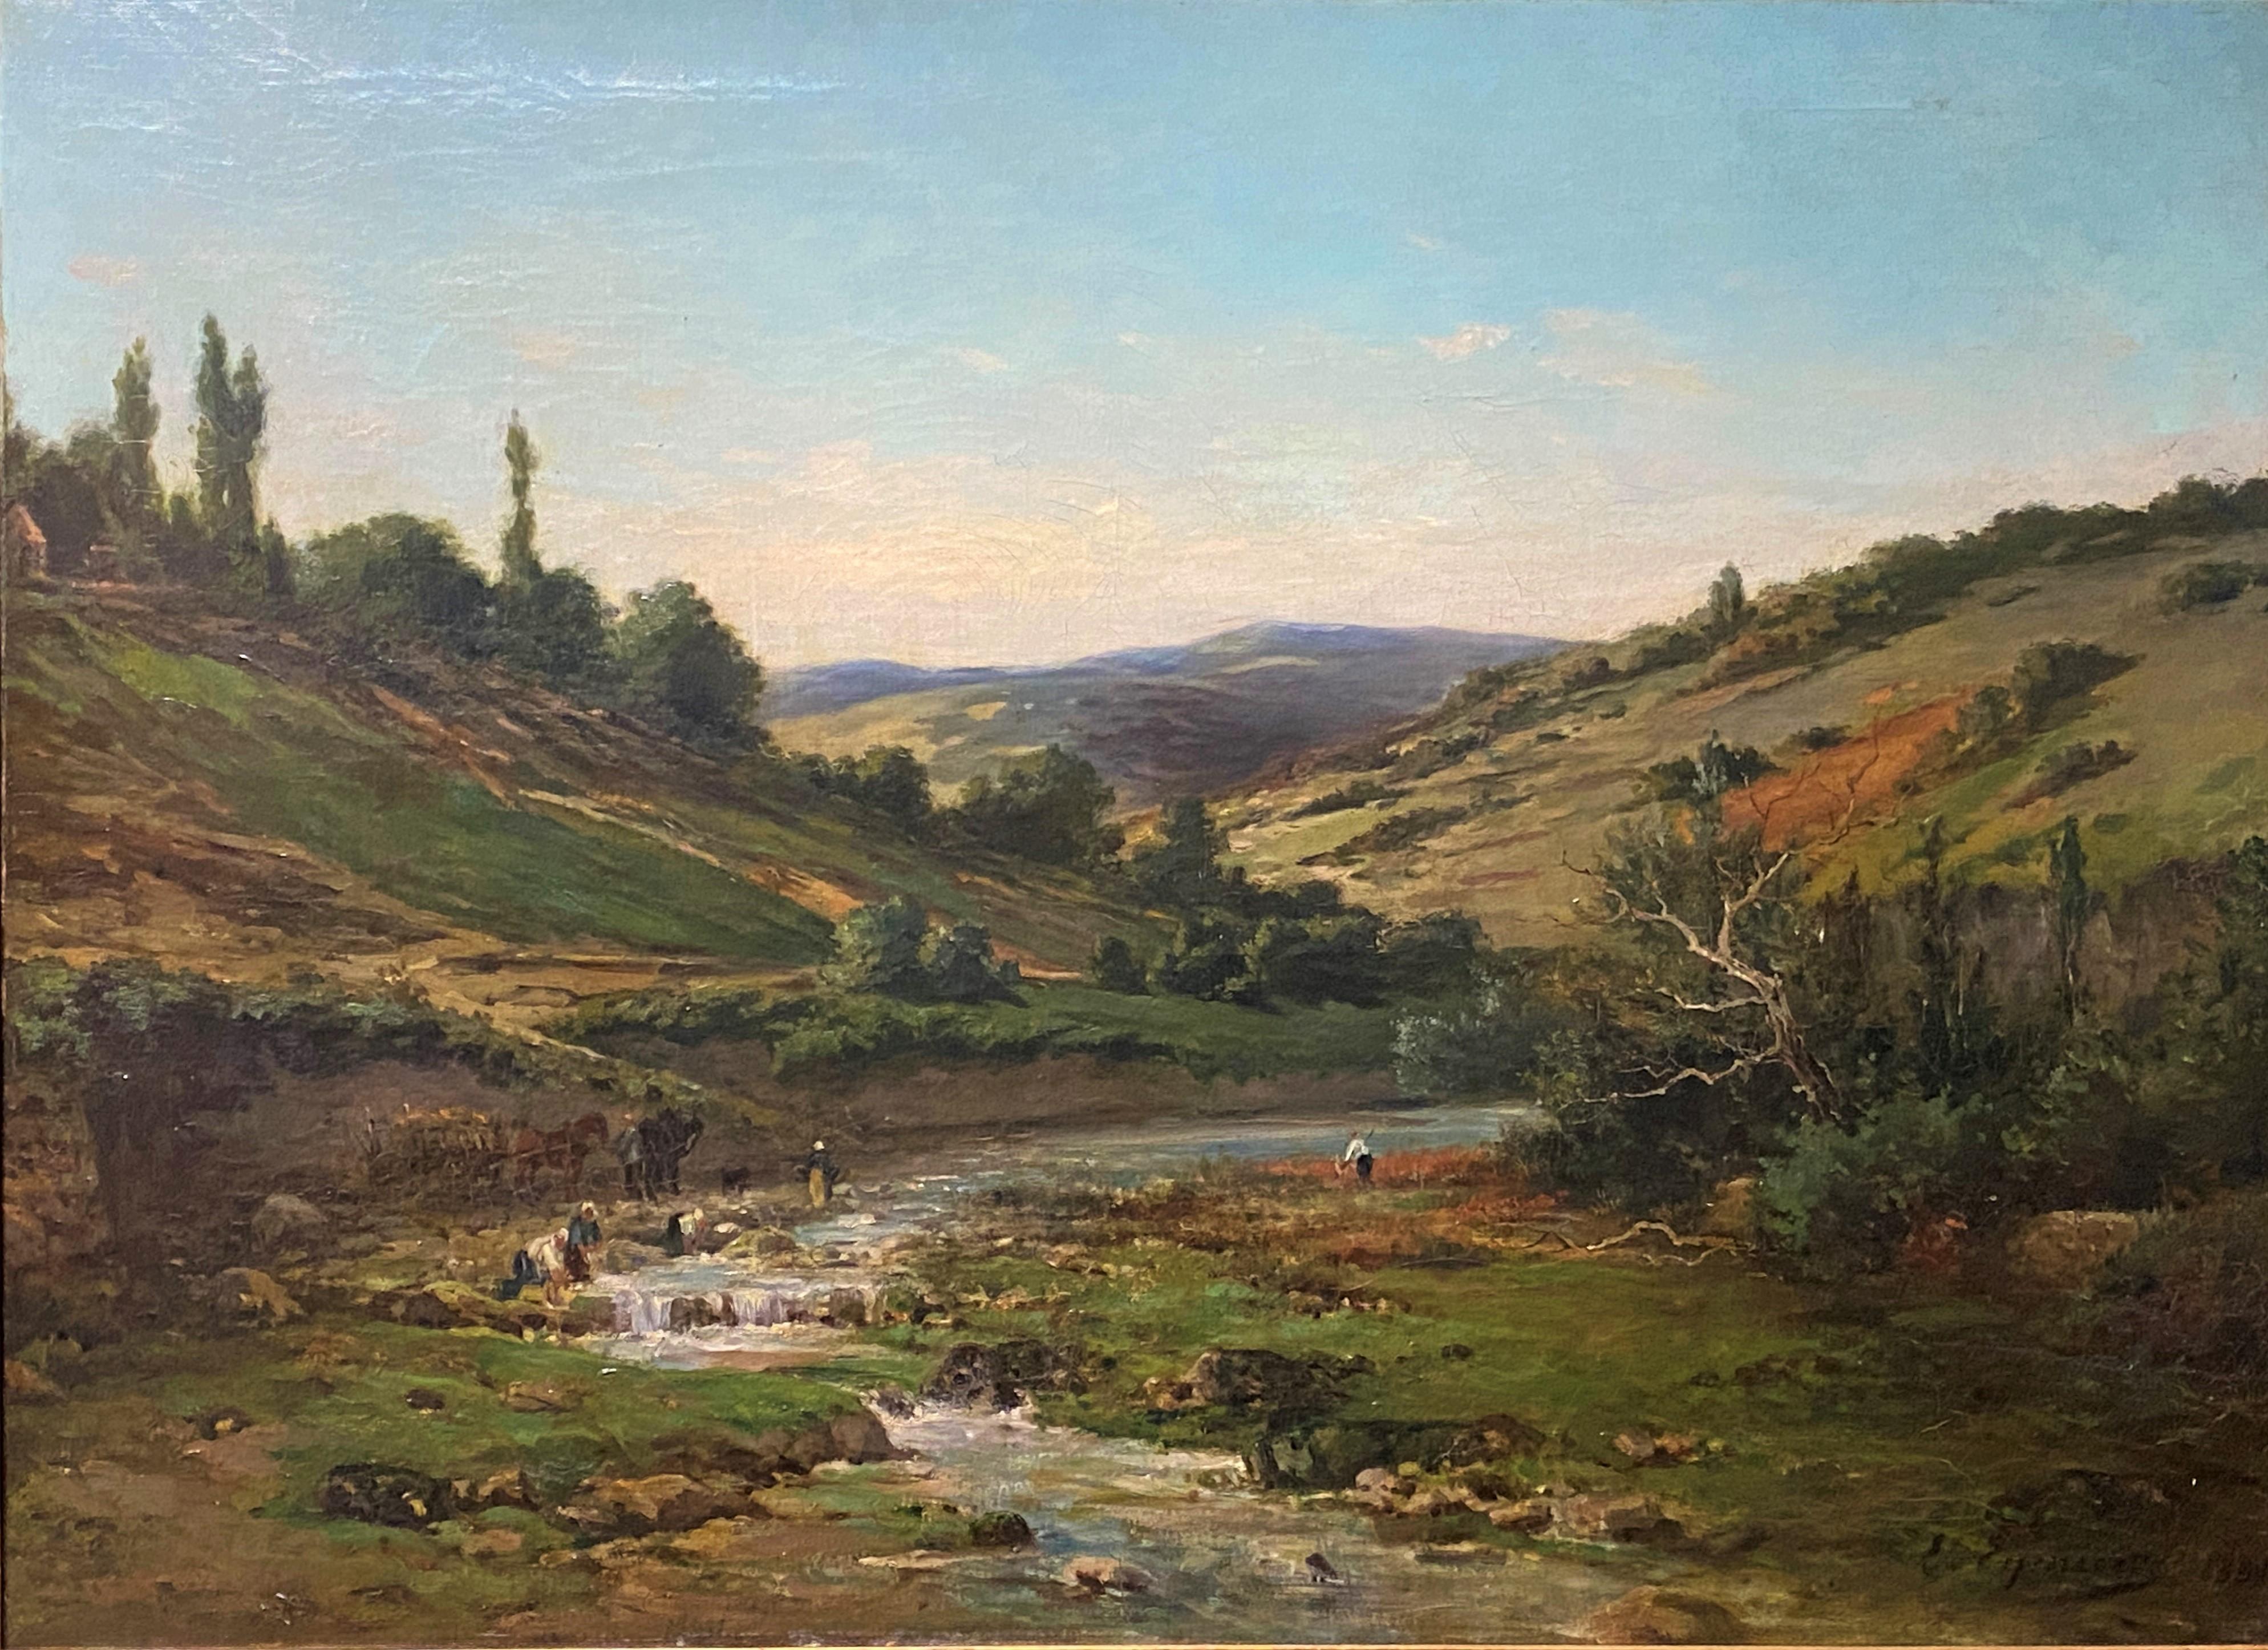 Painting, oil on canvas, representing an animated landscape in the vicinity of Saillans in the Drome. ( south-east of France )
The painter, Léon Bernard EYMIEU (1828-1907), is a landscape painter, pupil of Sauvageot and Roullet. He exhibited at the